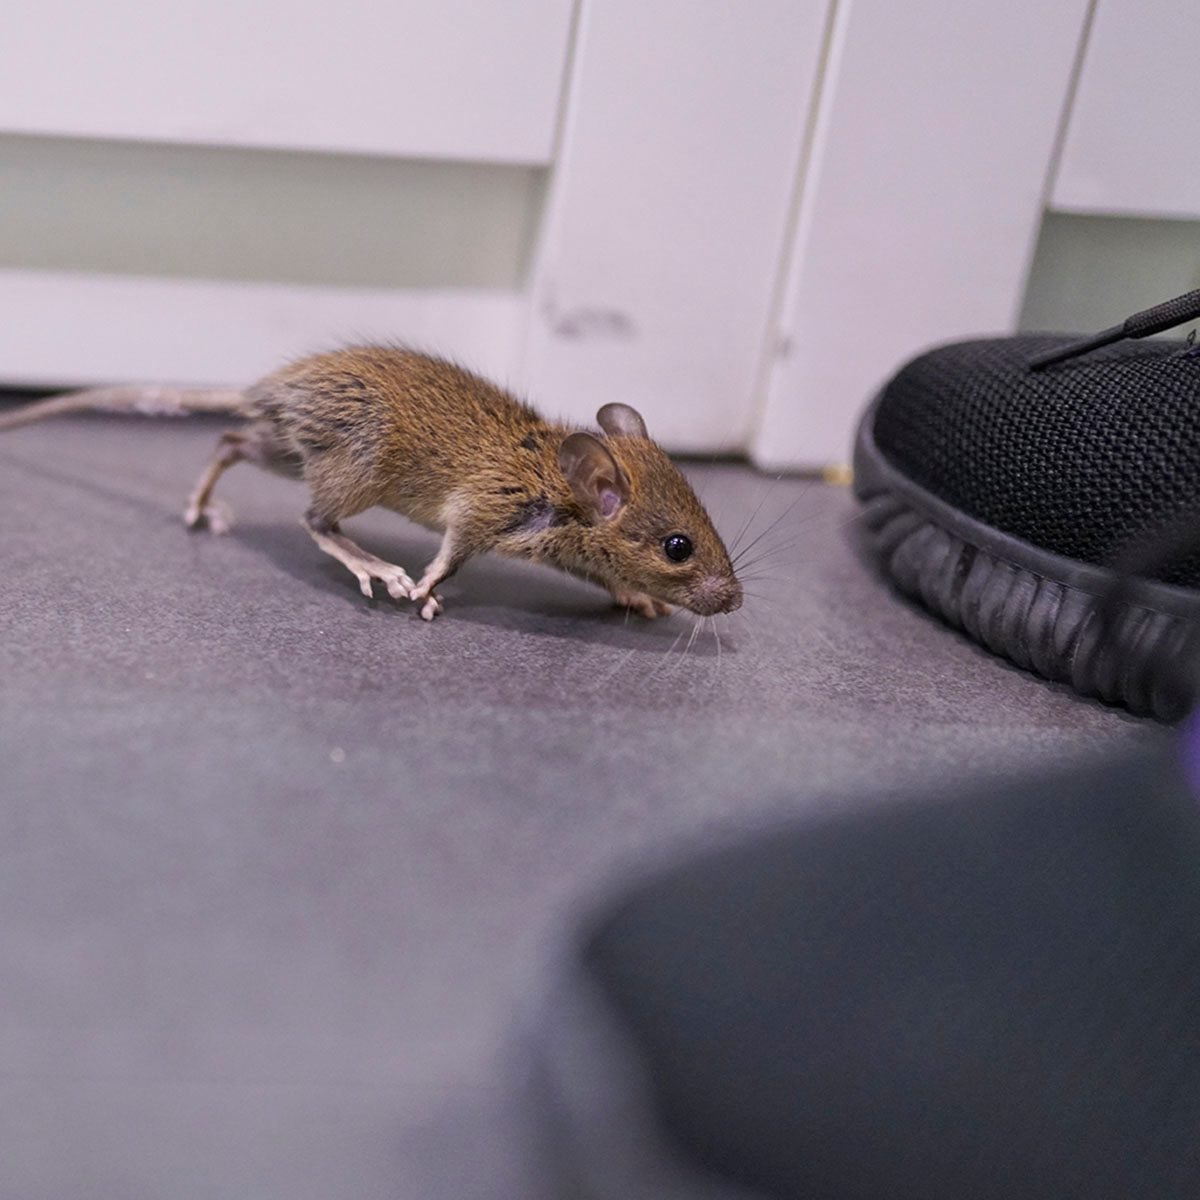 Rodent Proof Storage: 8 Ways to Keep Mice Out Permanently